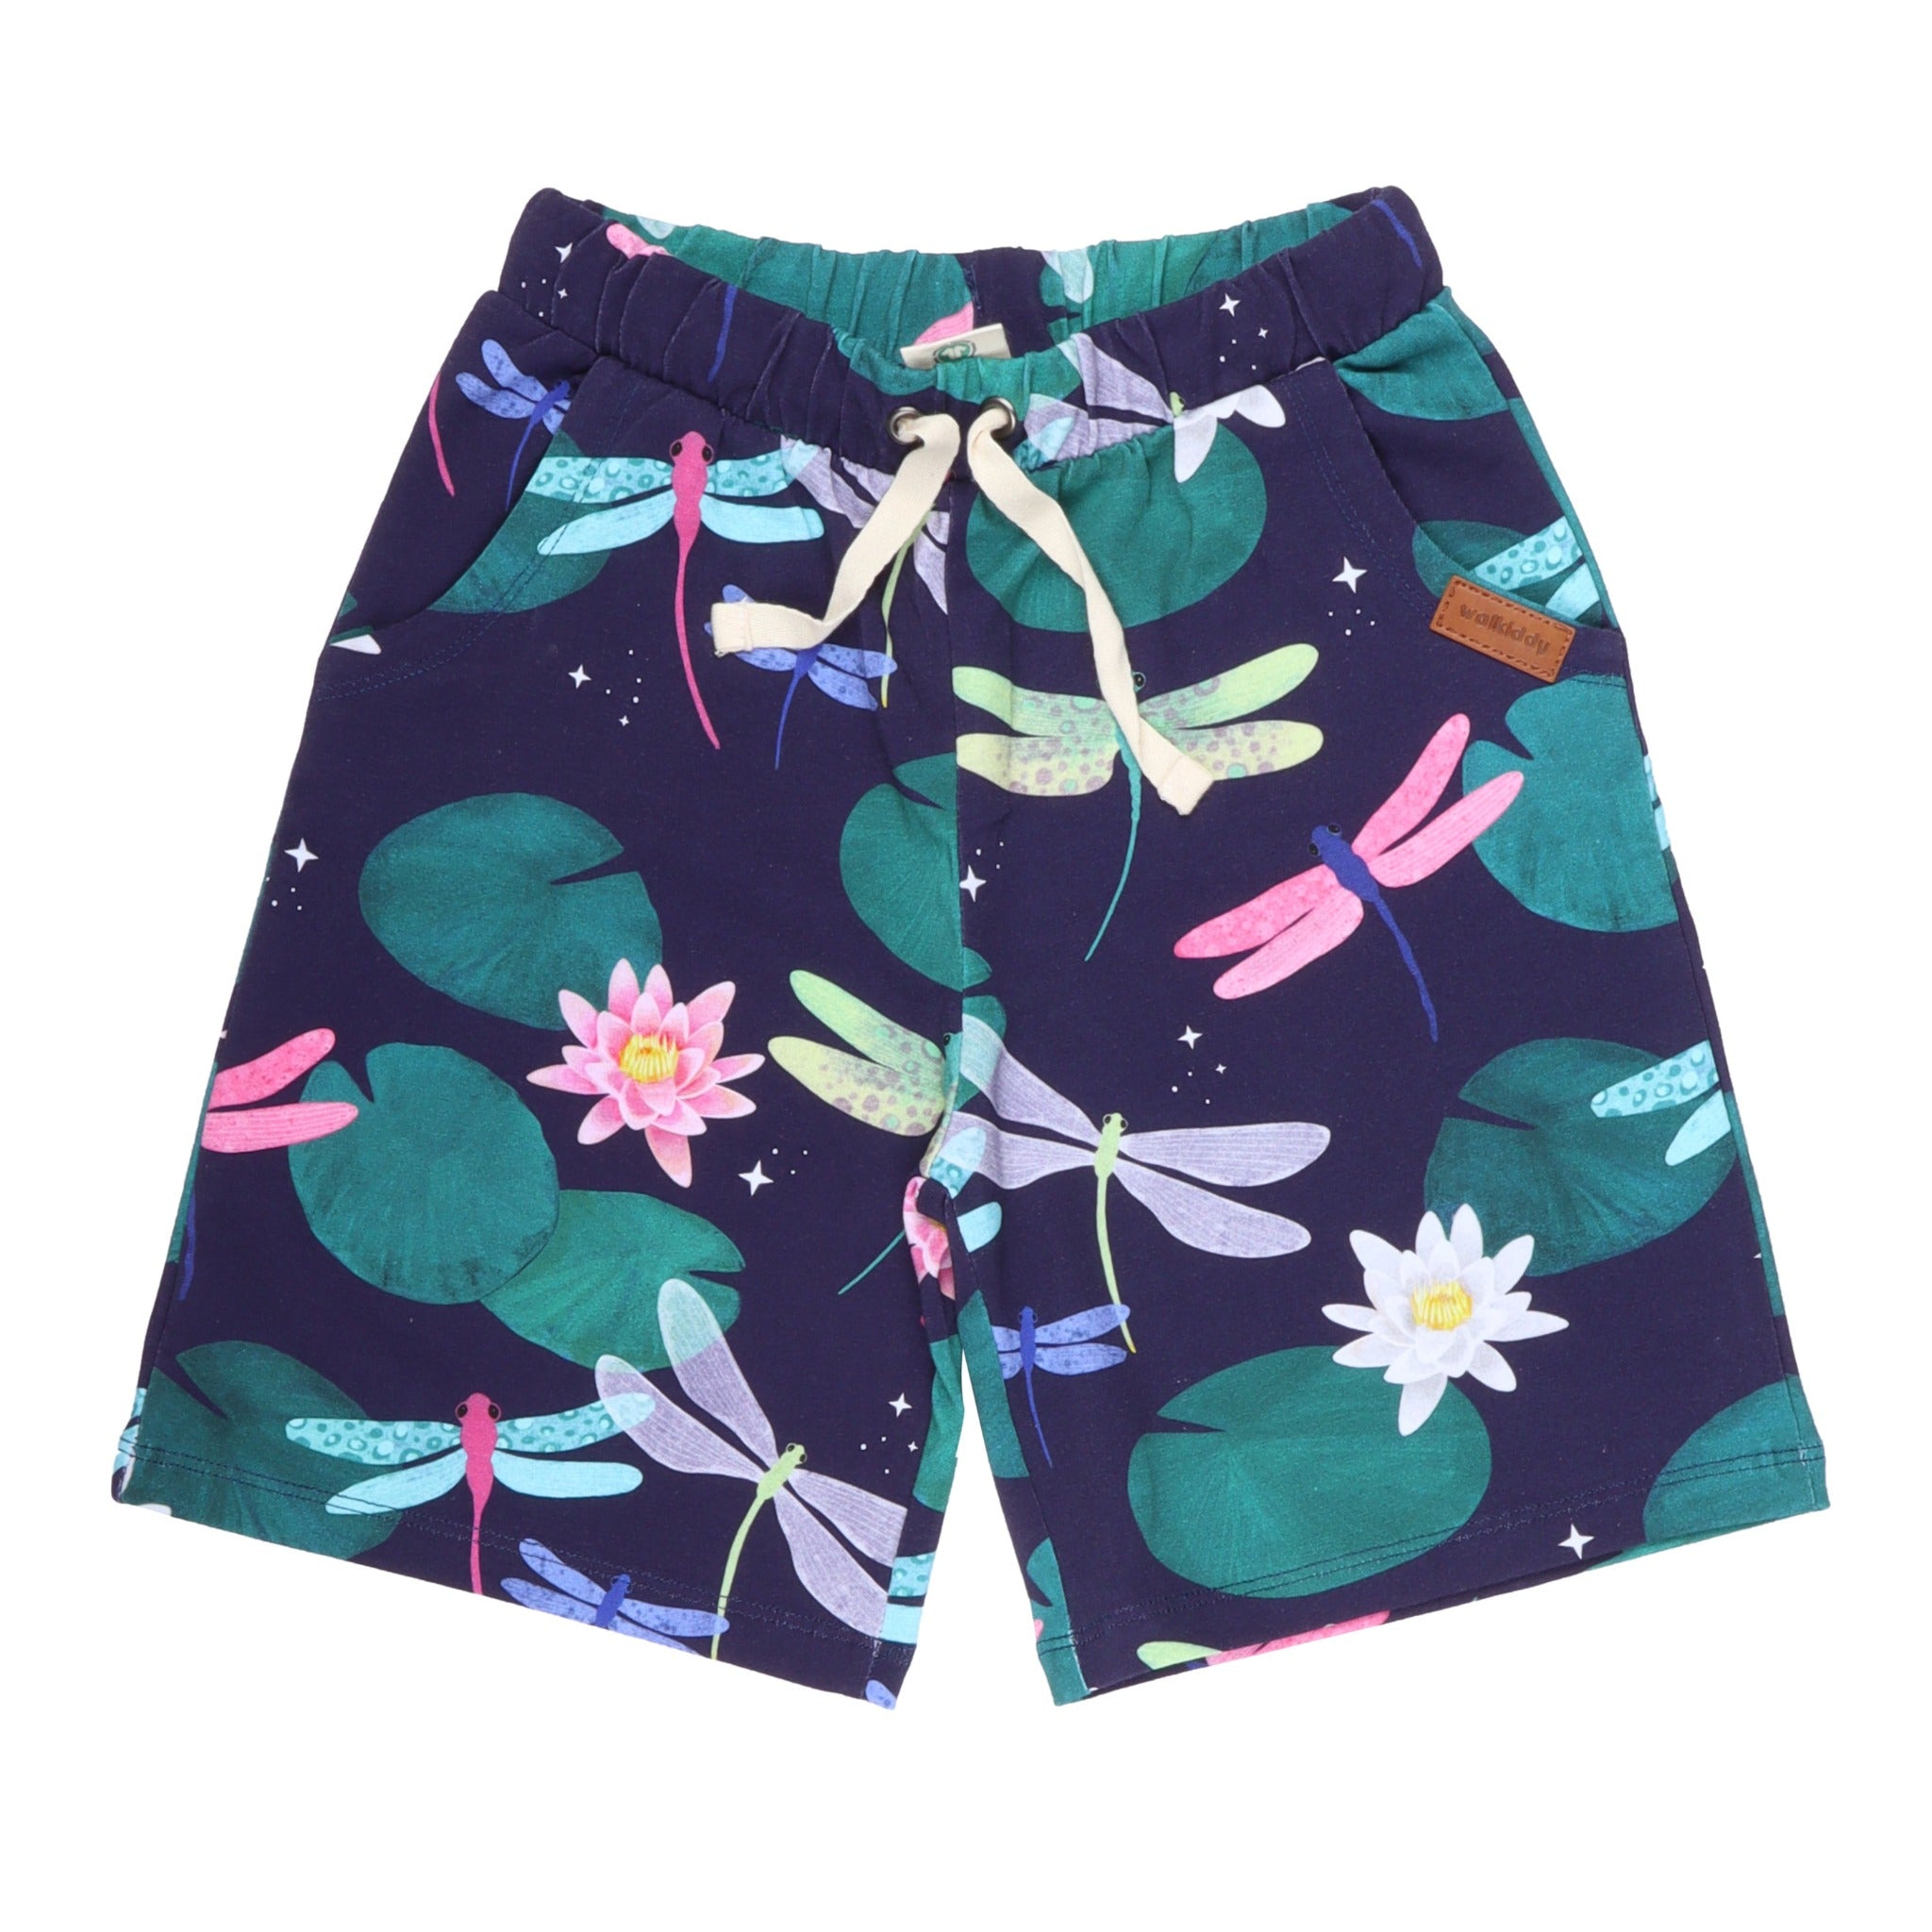 Walkiddy Shorts- colorful dragonflies